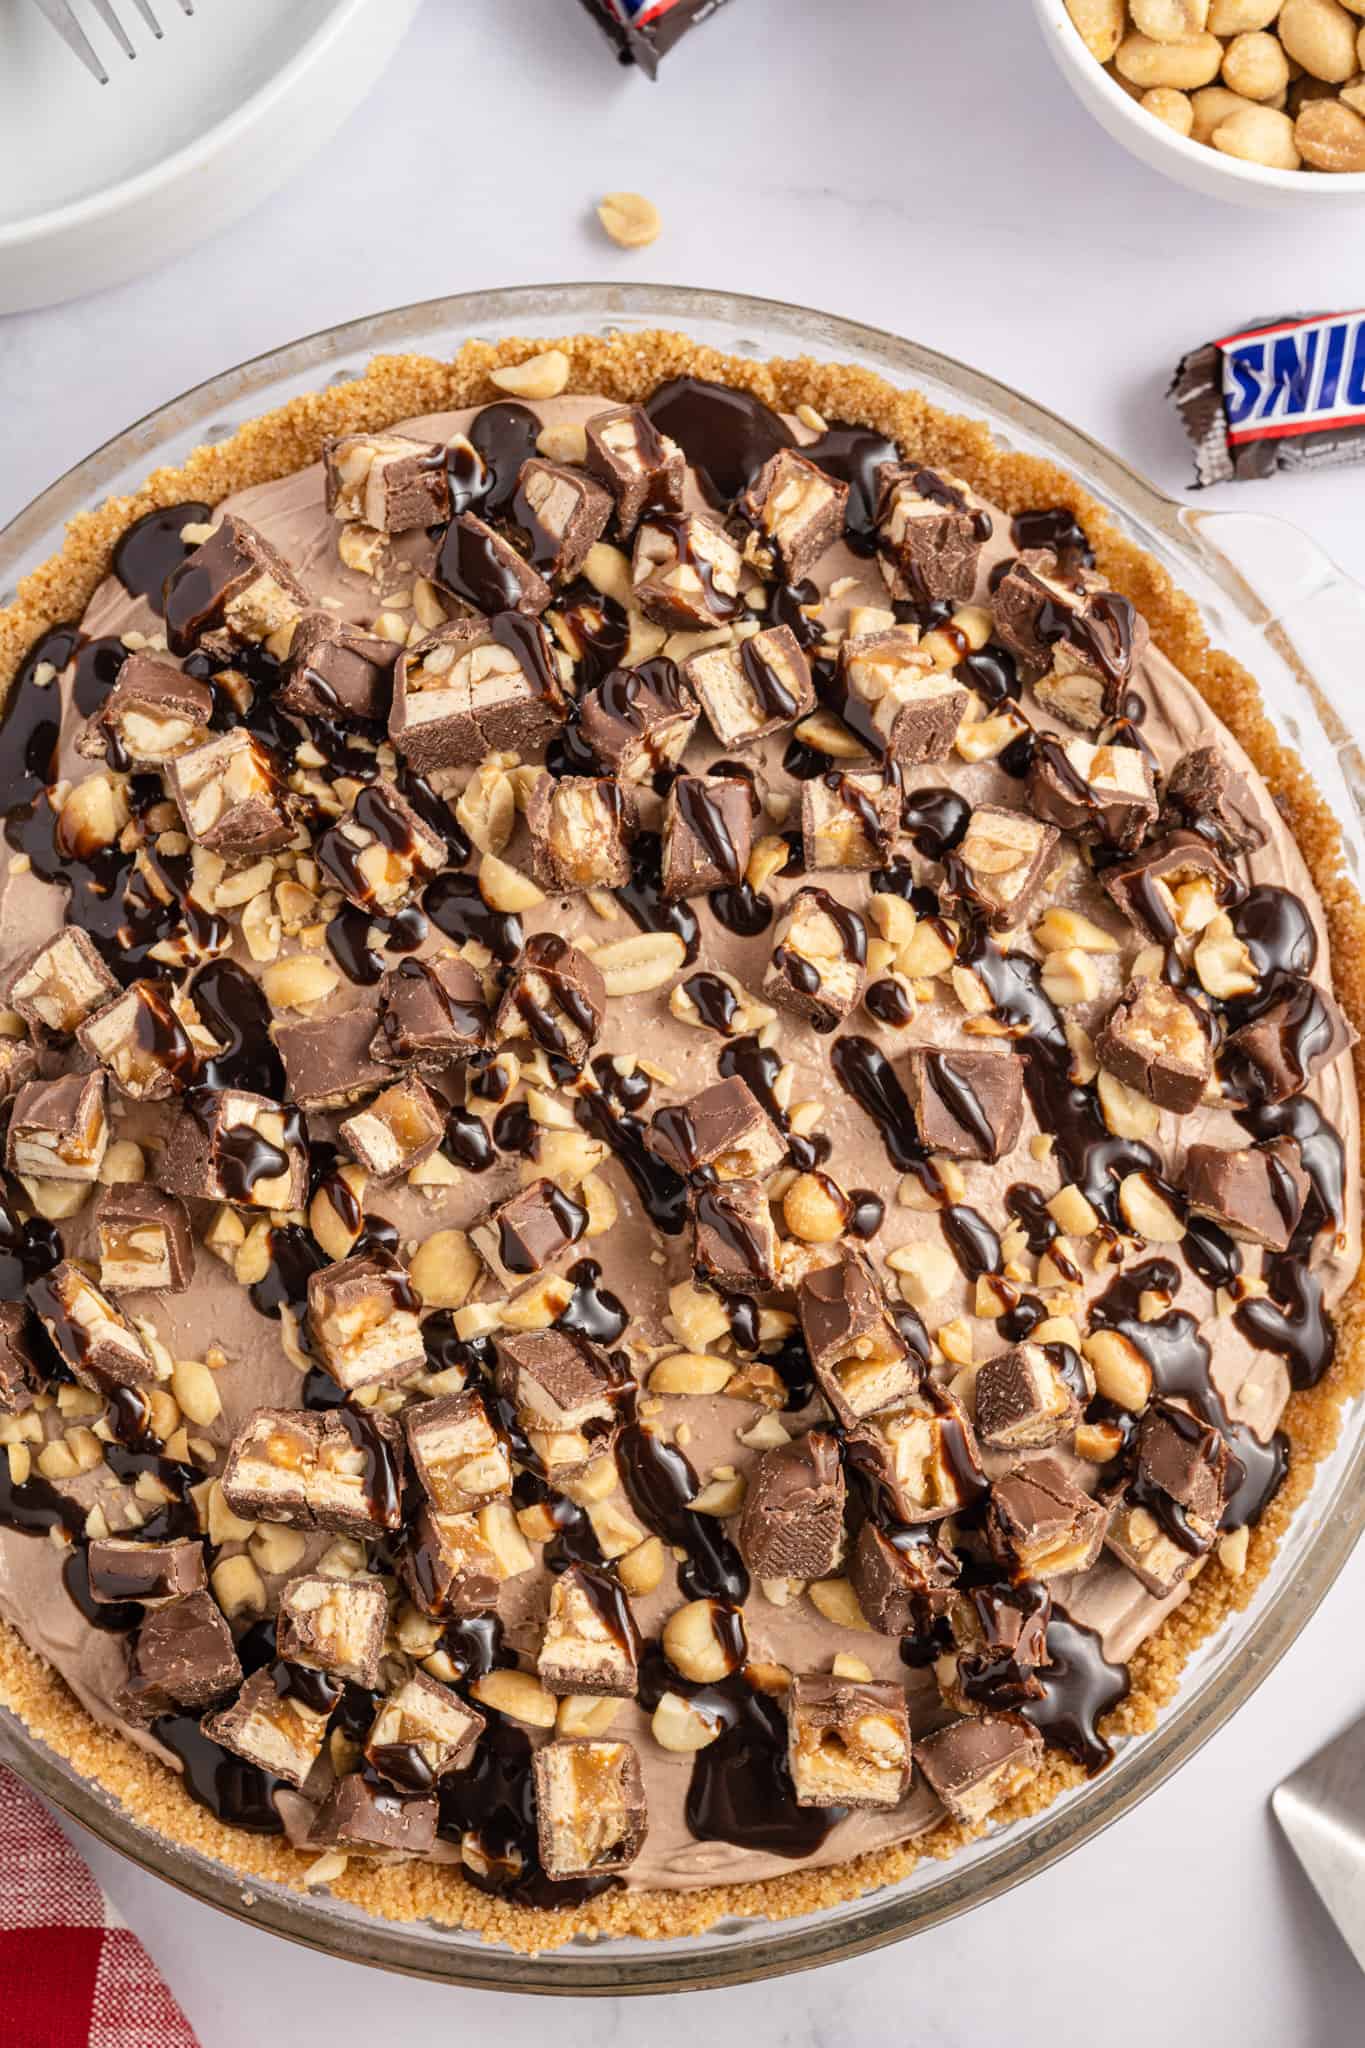 Snickers Pie is a delicious no bake dessert recipe with a graham cracker crust and a creamy filling made with cream cheese, cocoa powder, caramel sauce and Cool Whip all loaded with salted peanuts and chopped Snickers candy bars.